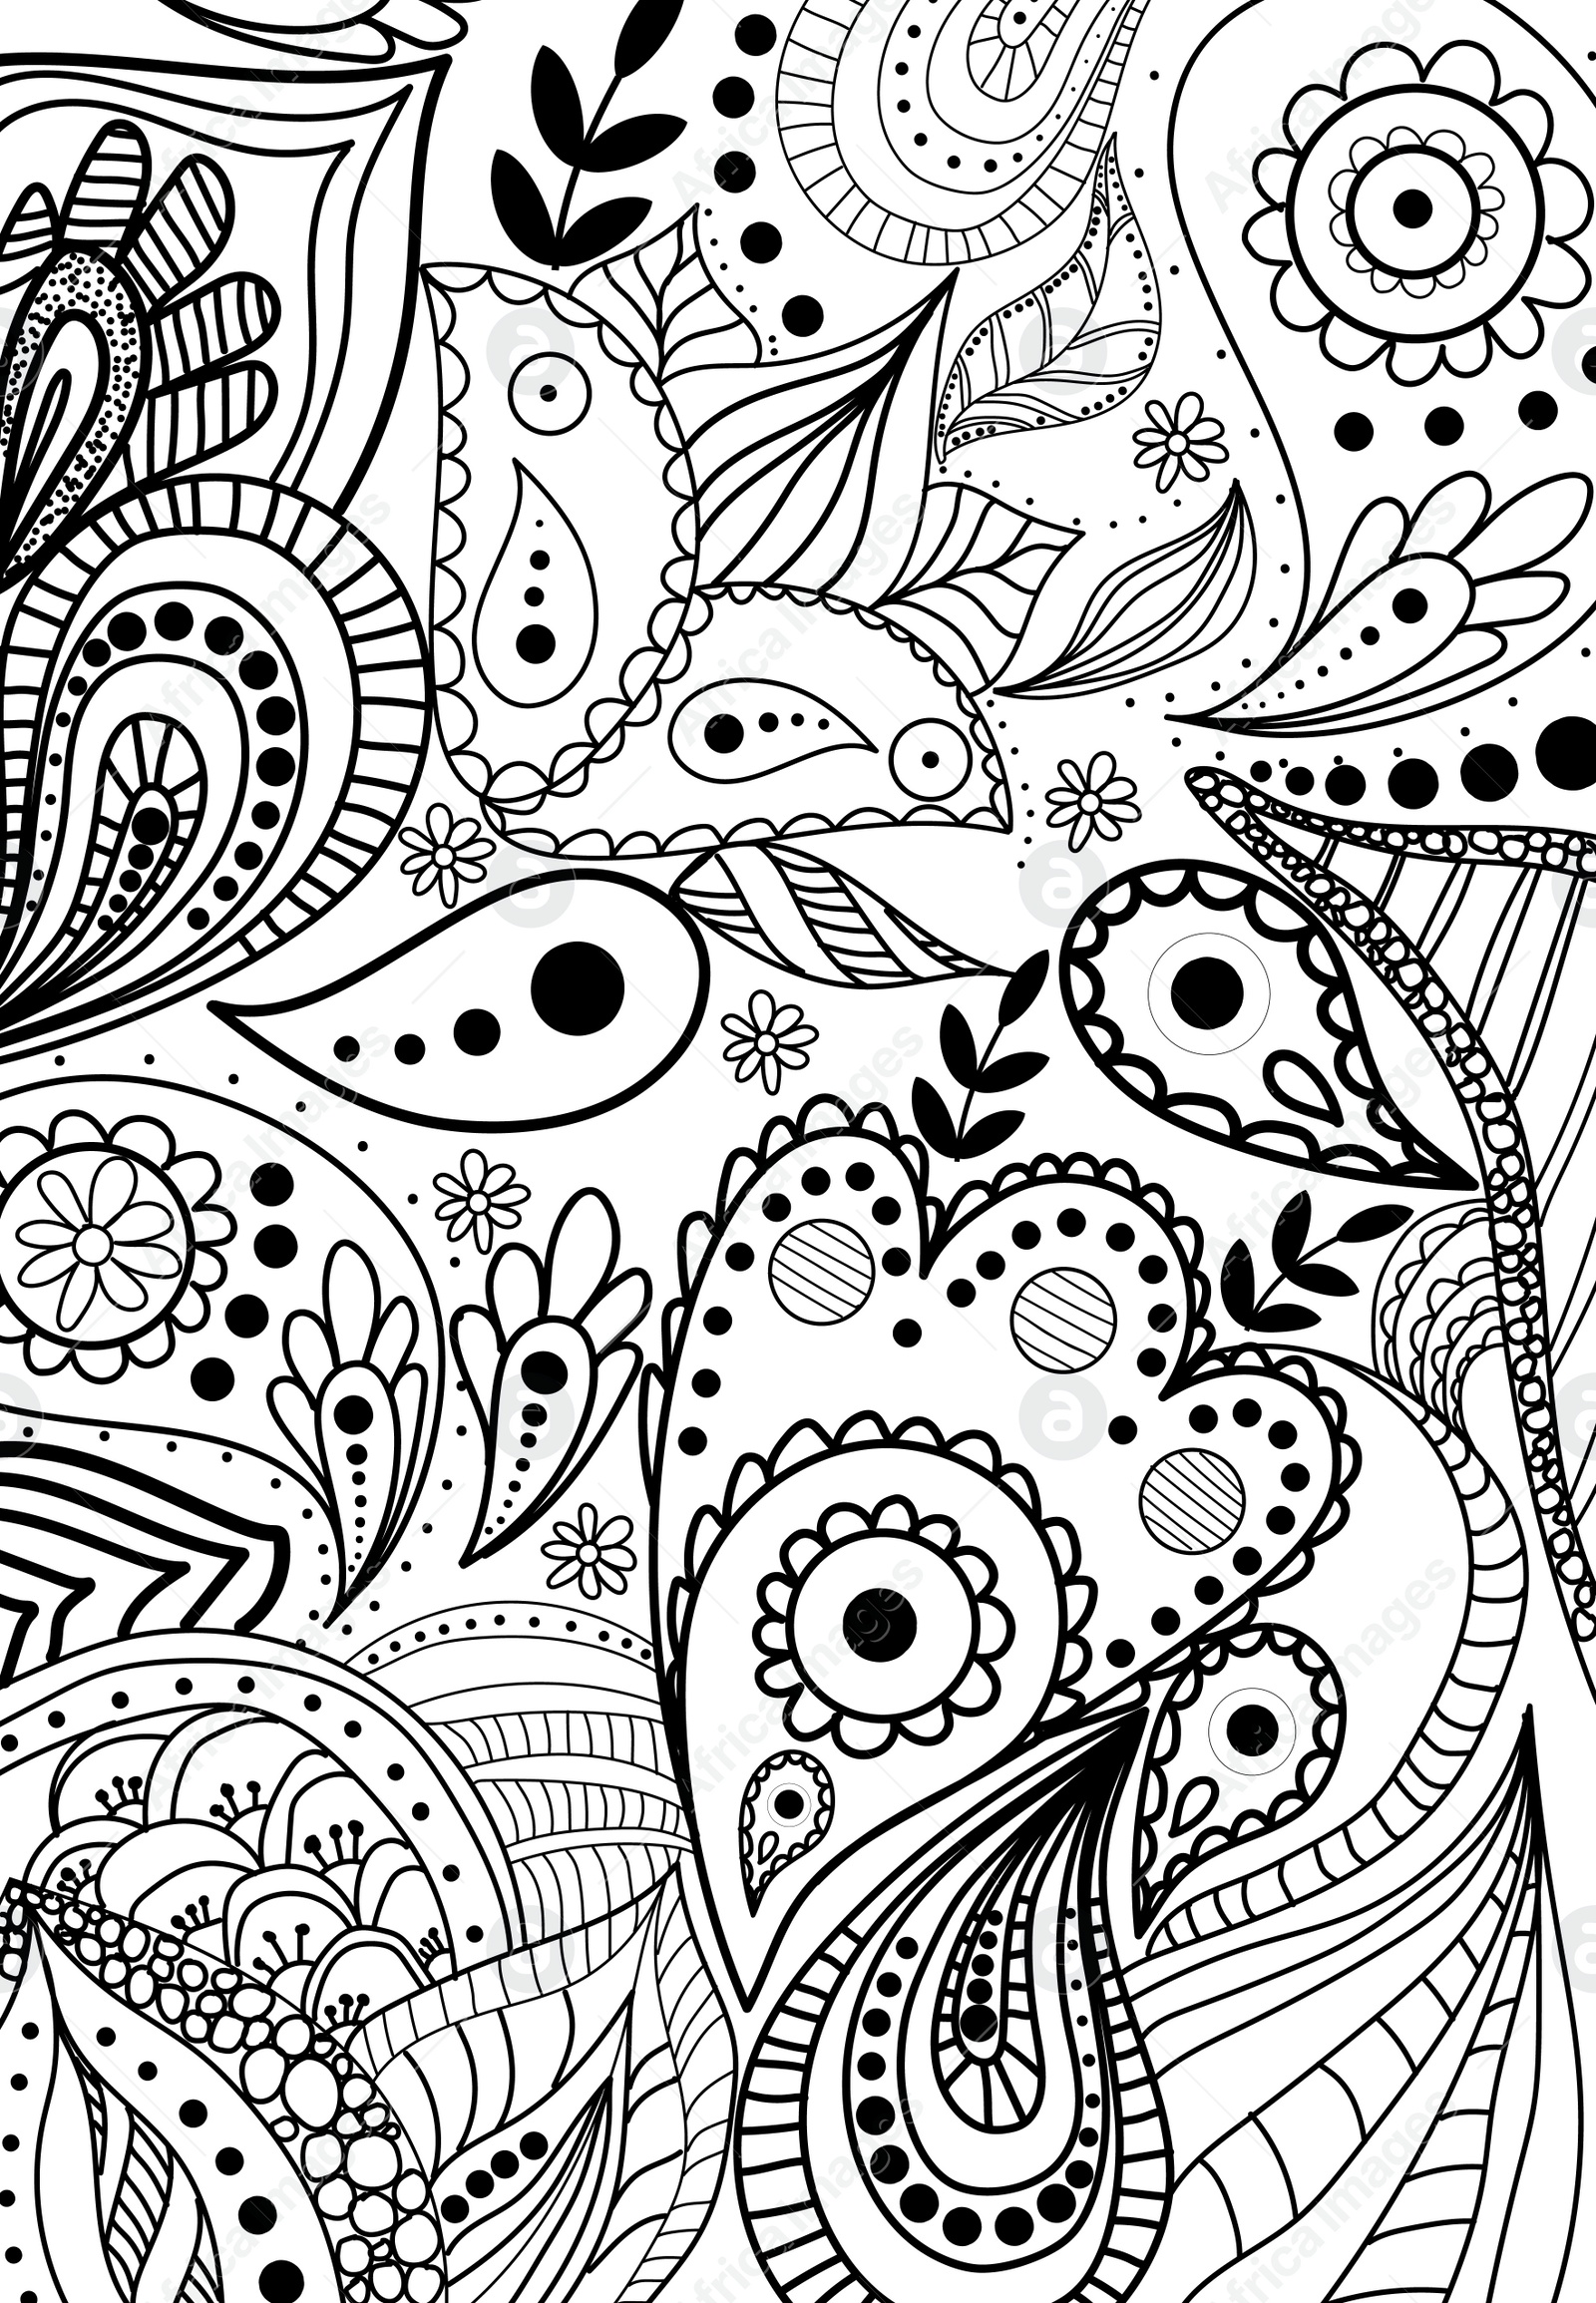 Image of Abstract ornaments on white background, illustration. Coloring page